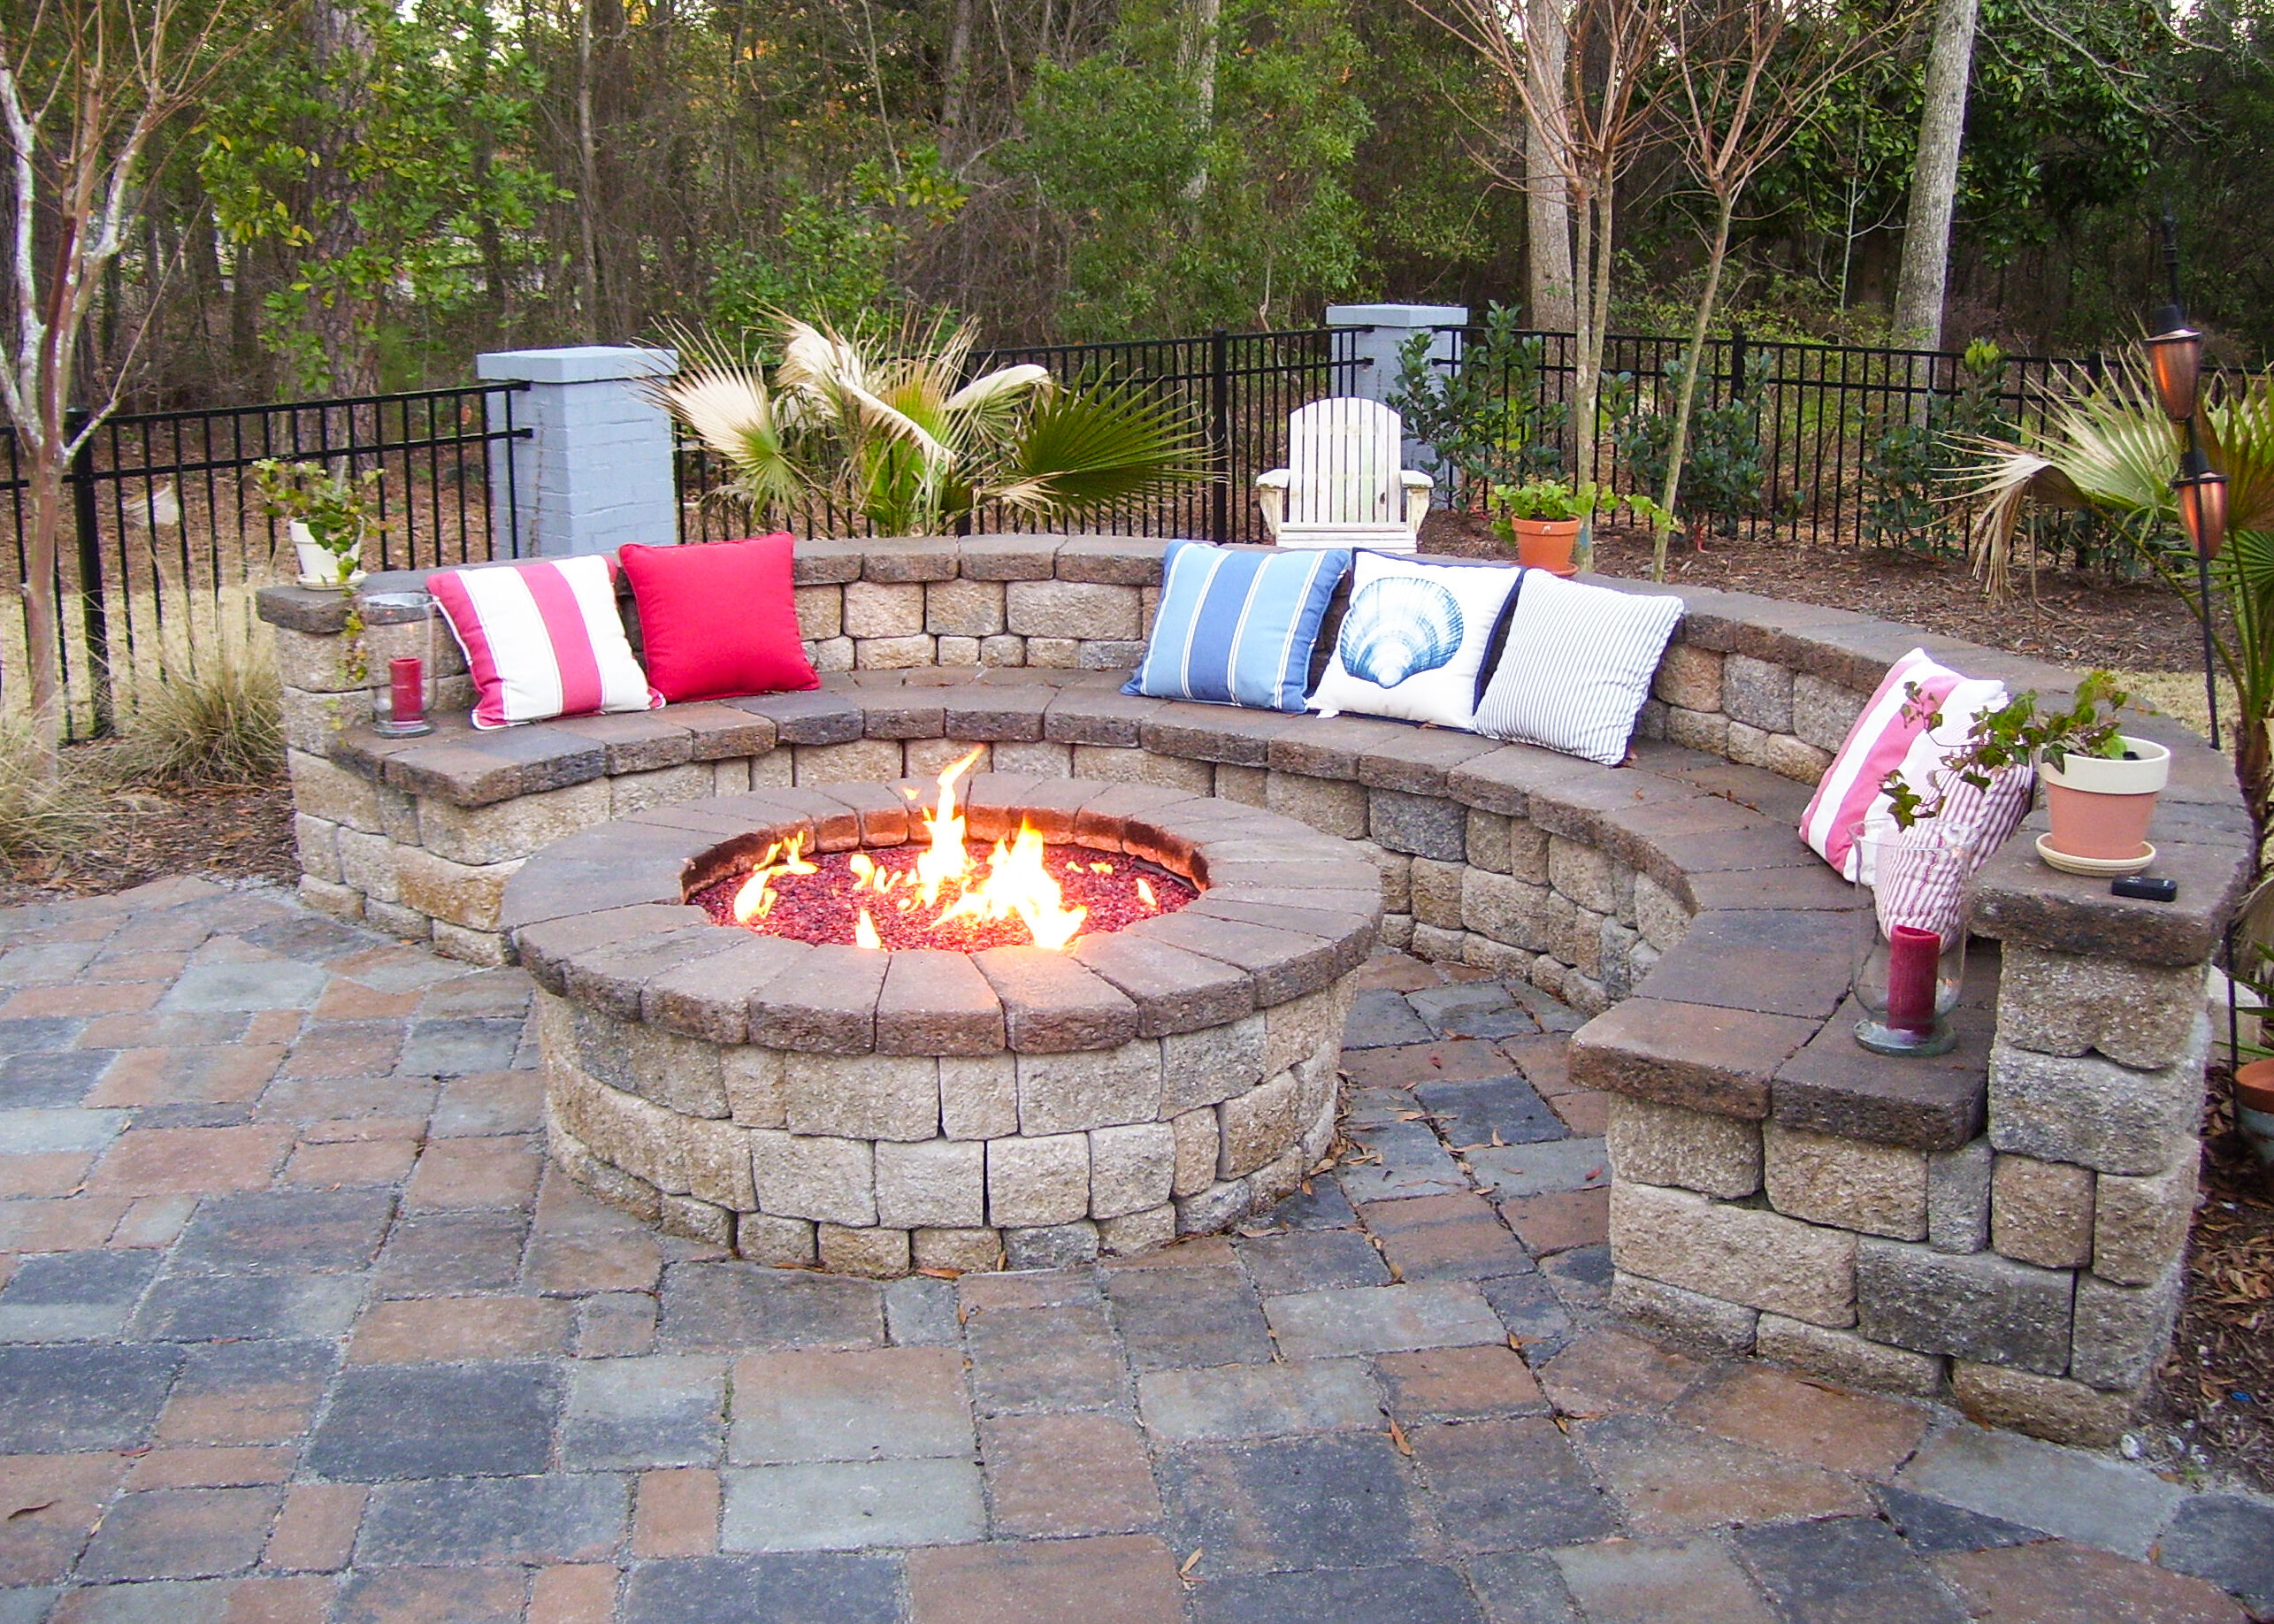 3 Easy Diy Fire Pit Ideas, How To Build An Easy Backyard Fire Pit